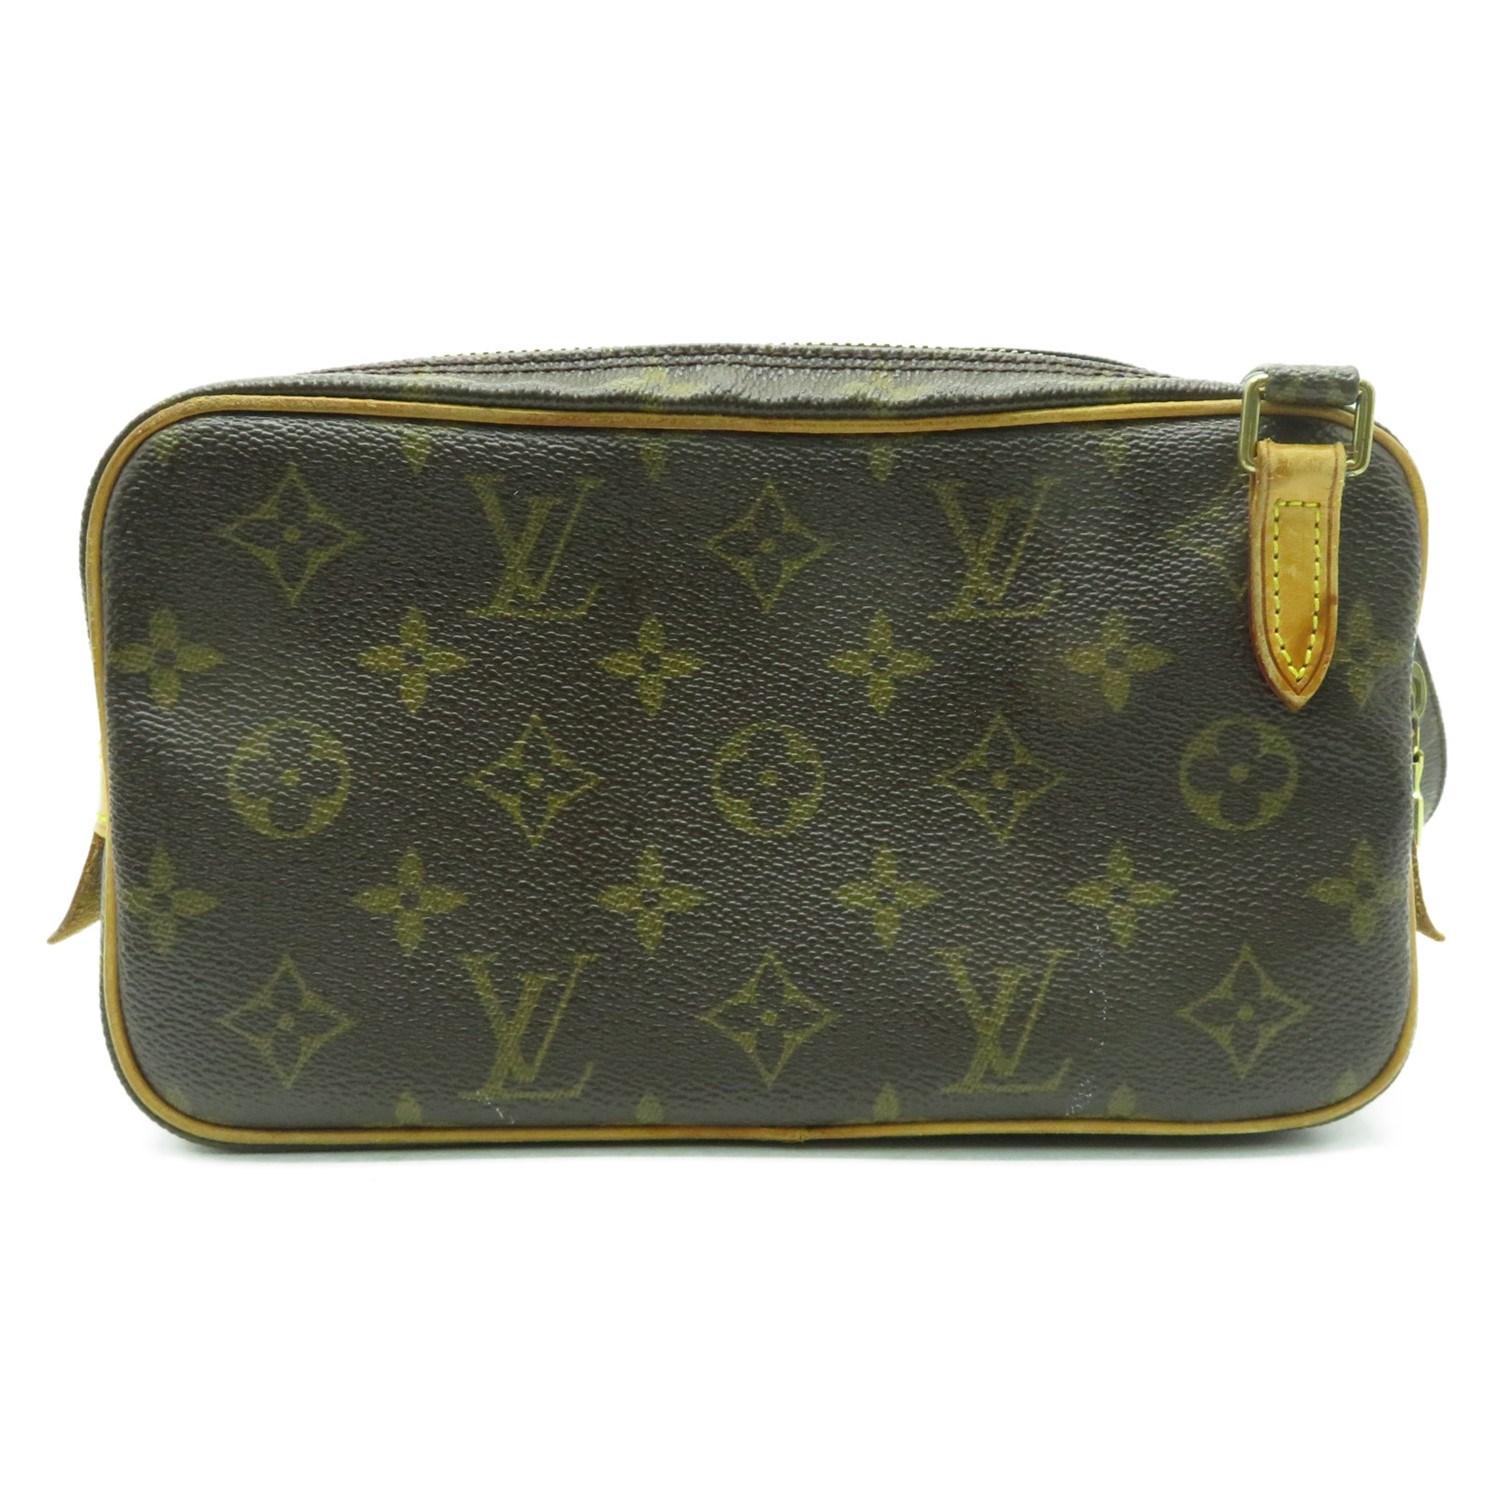 Louis Vuitton Lv Marly Bandouliere Shoulder Bag M51828 Monogram 3900 in Brown - Lyst